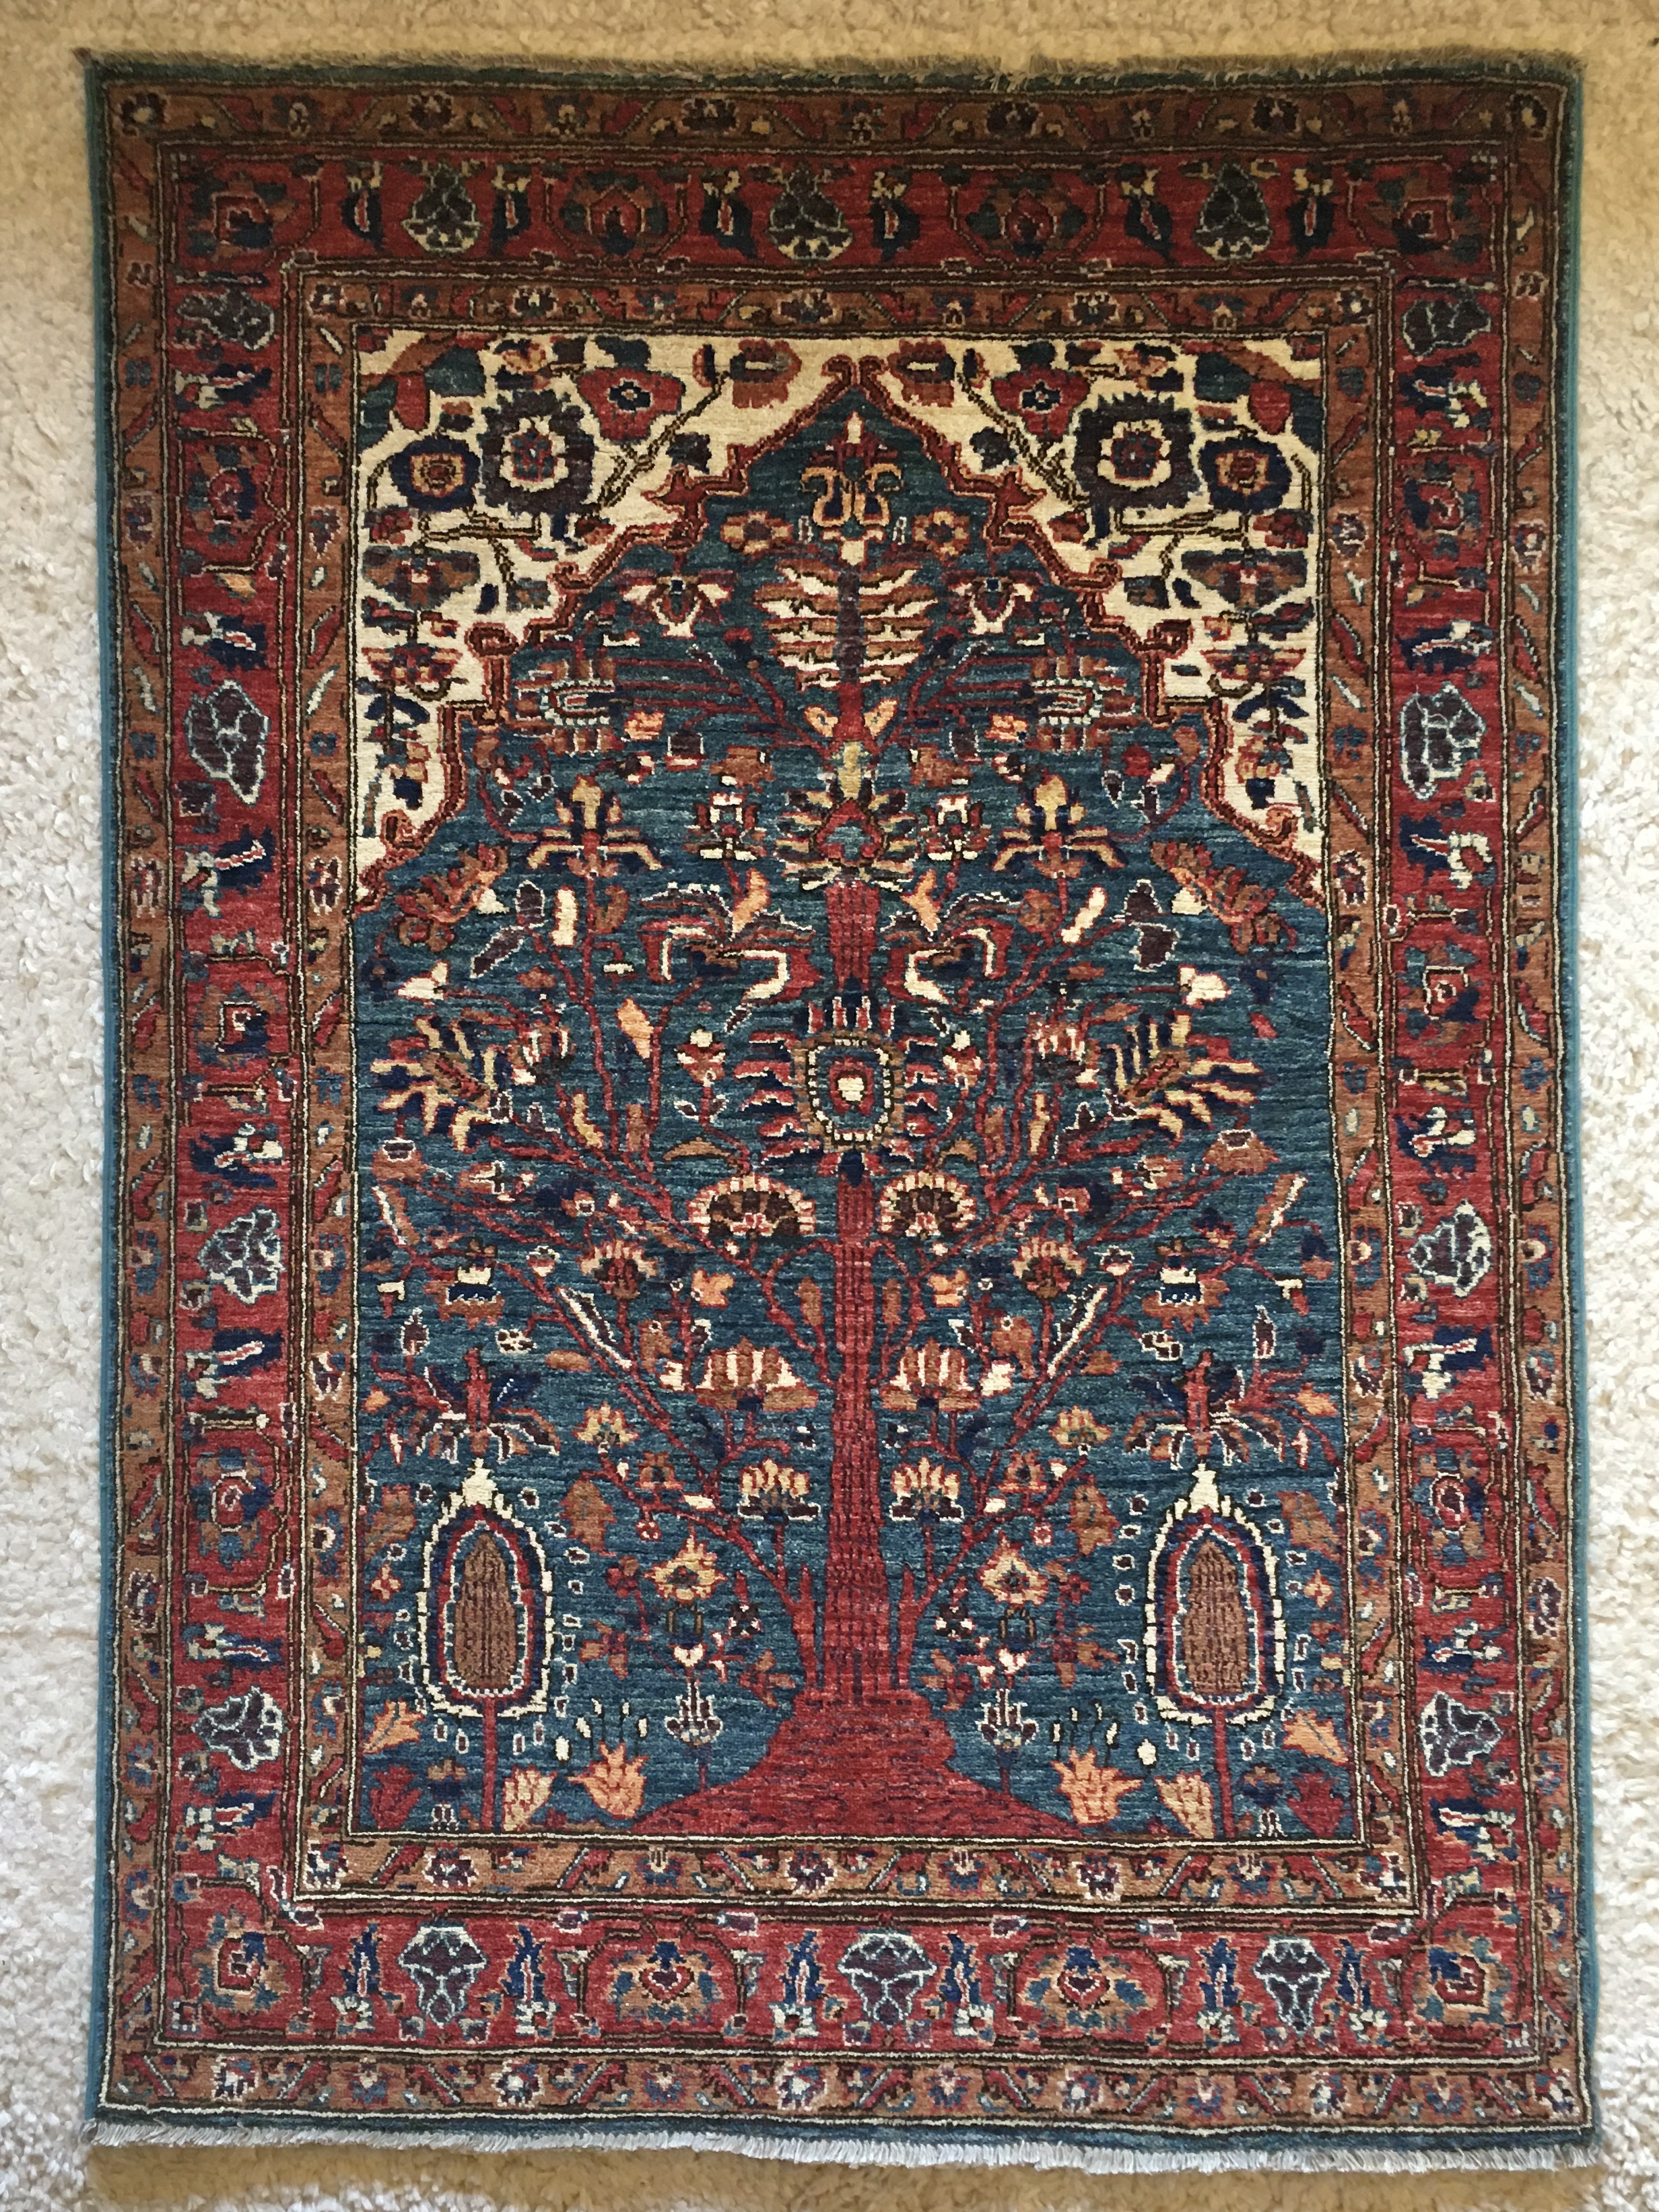 a red and blue rug depicting the tree of life